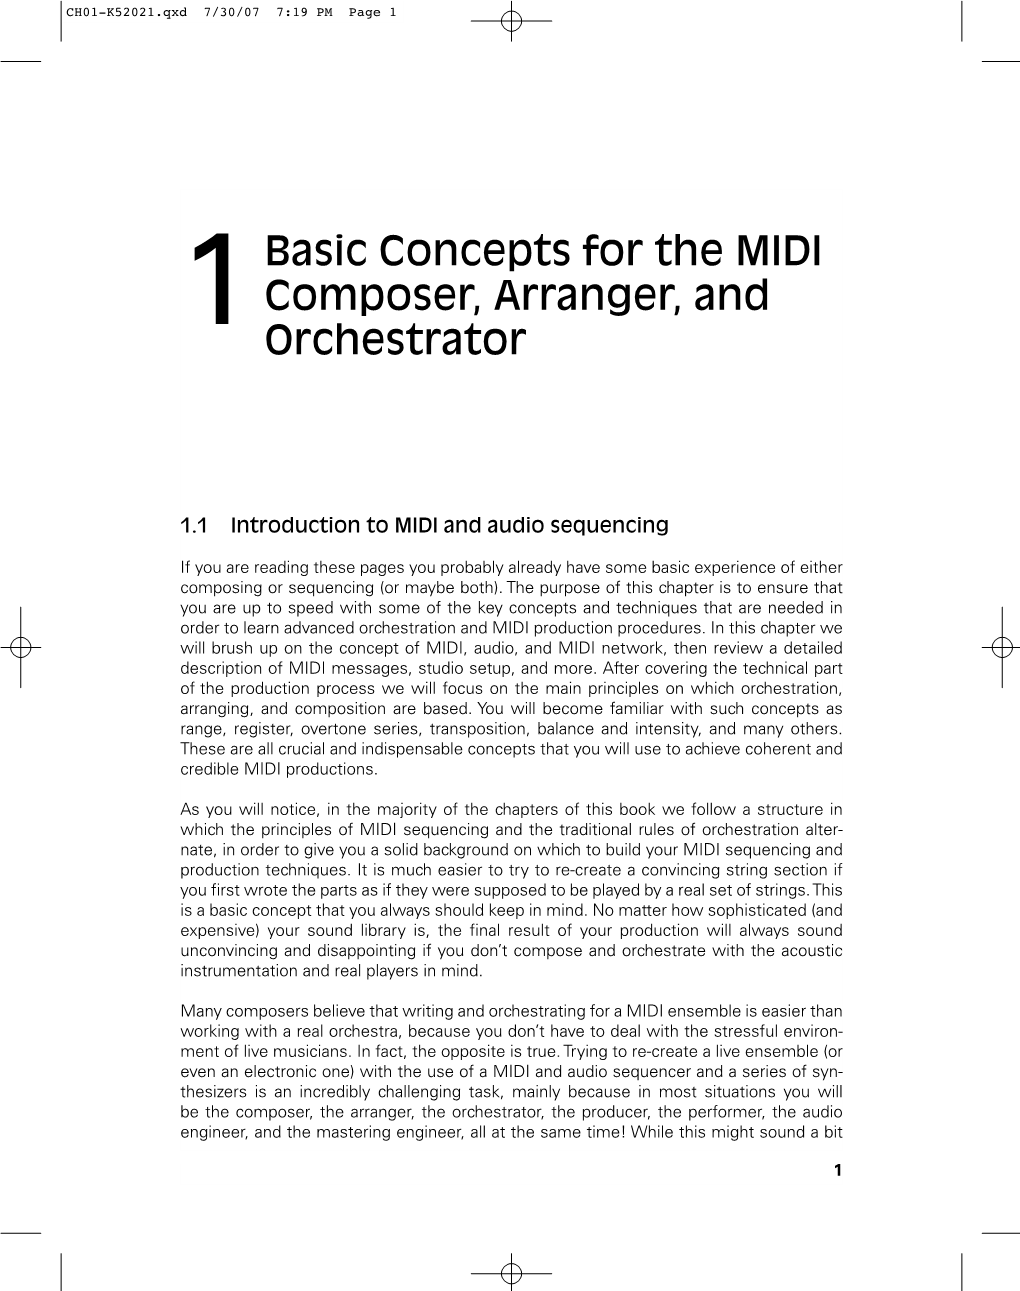 1Basic Concepts for the MIDI Composer, Arranger, and Orchestrator